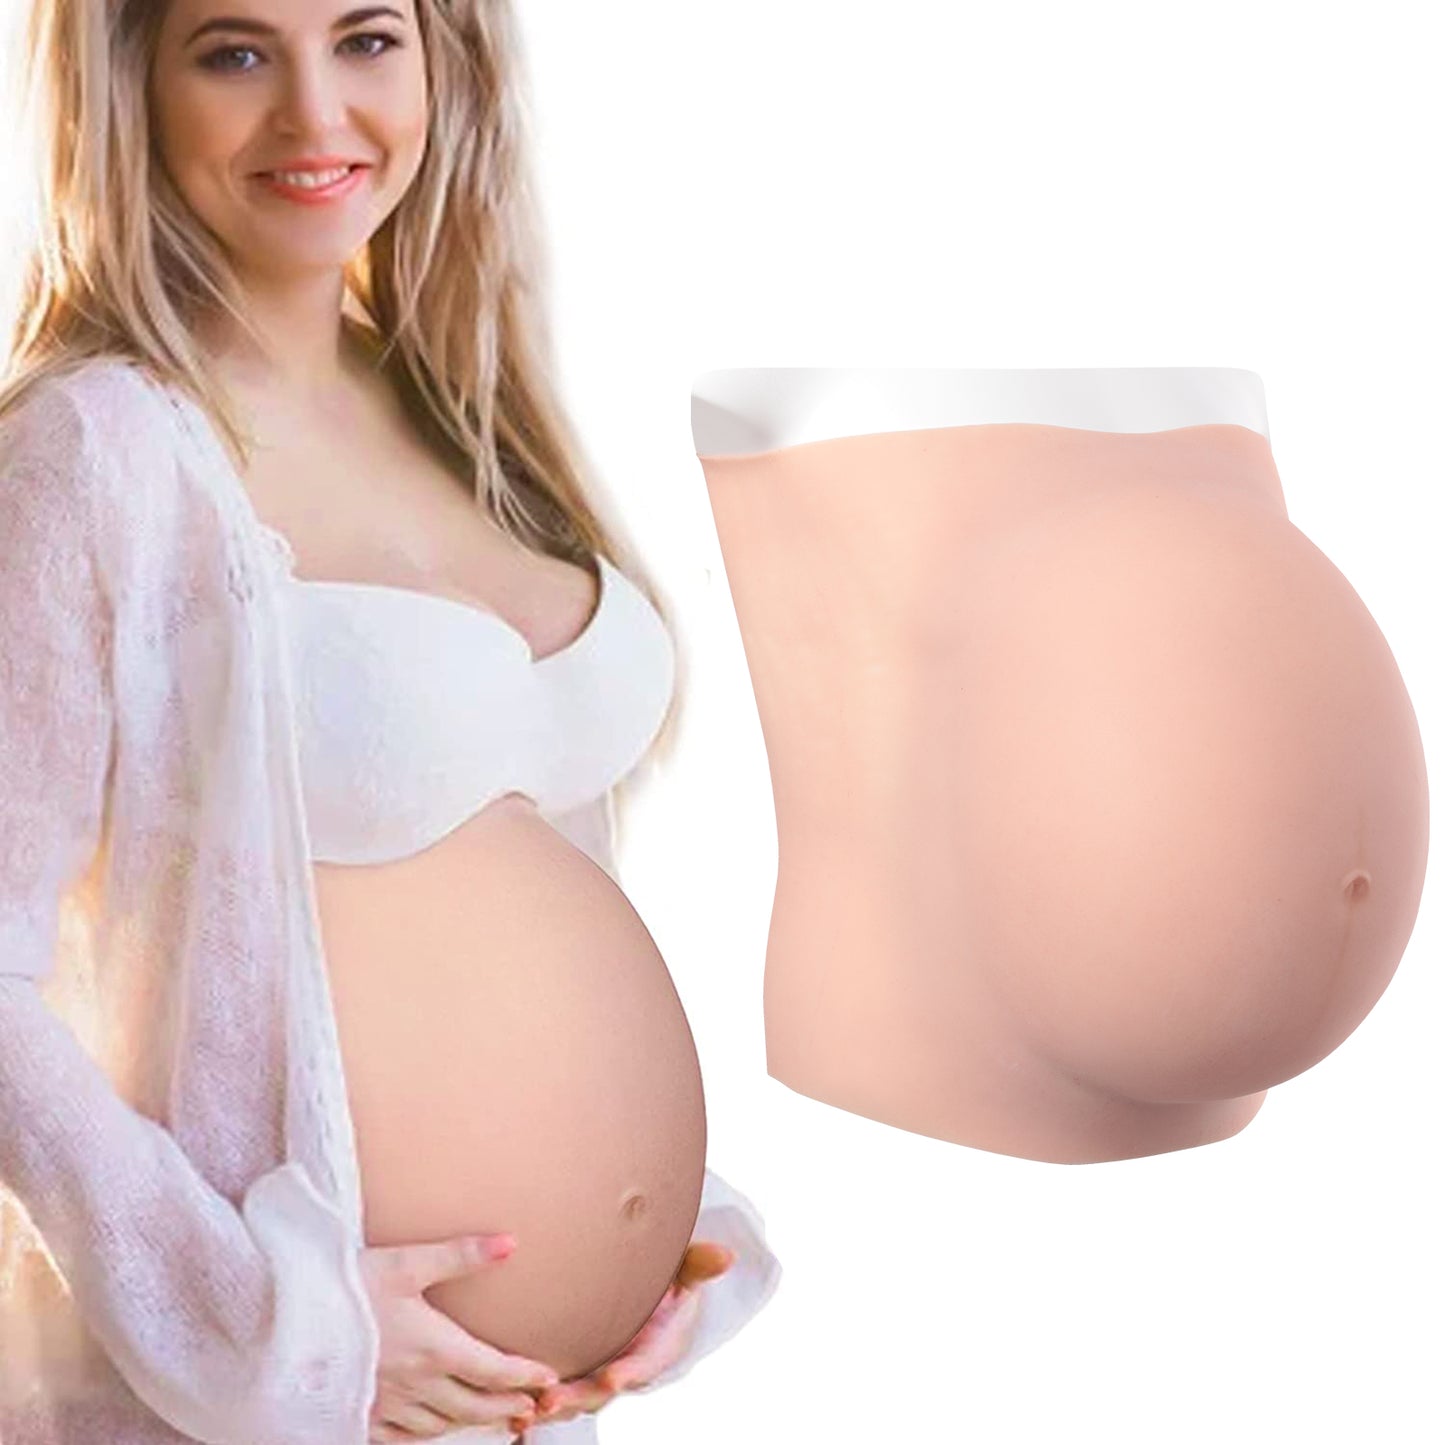 Eyung 100% Artificial 8th Silicone Fake Pregnant Soft Belly Realistic Silicone Pregnancy Jelly Belly For Crossdresser Unisex Cosplay